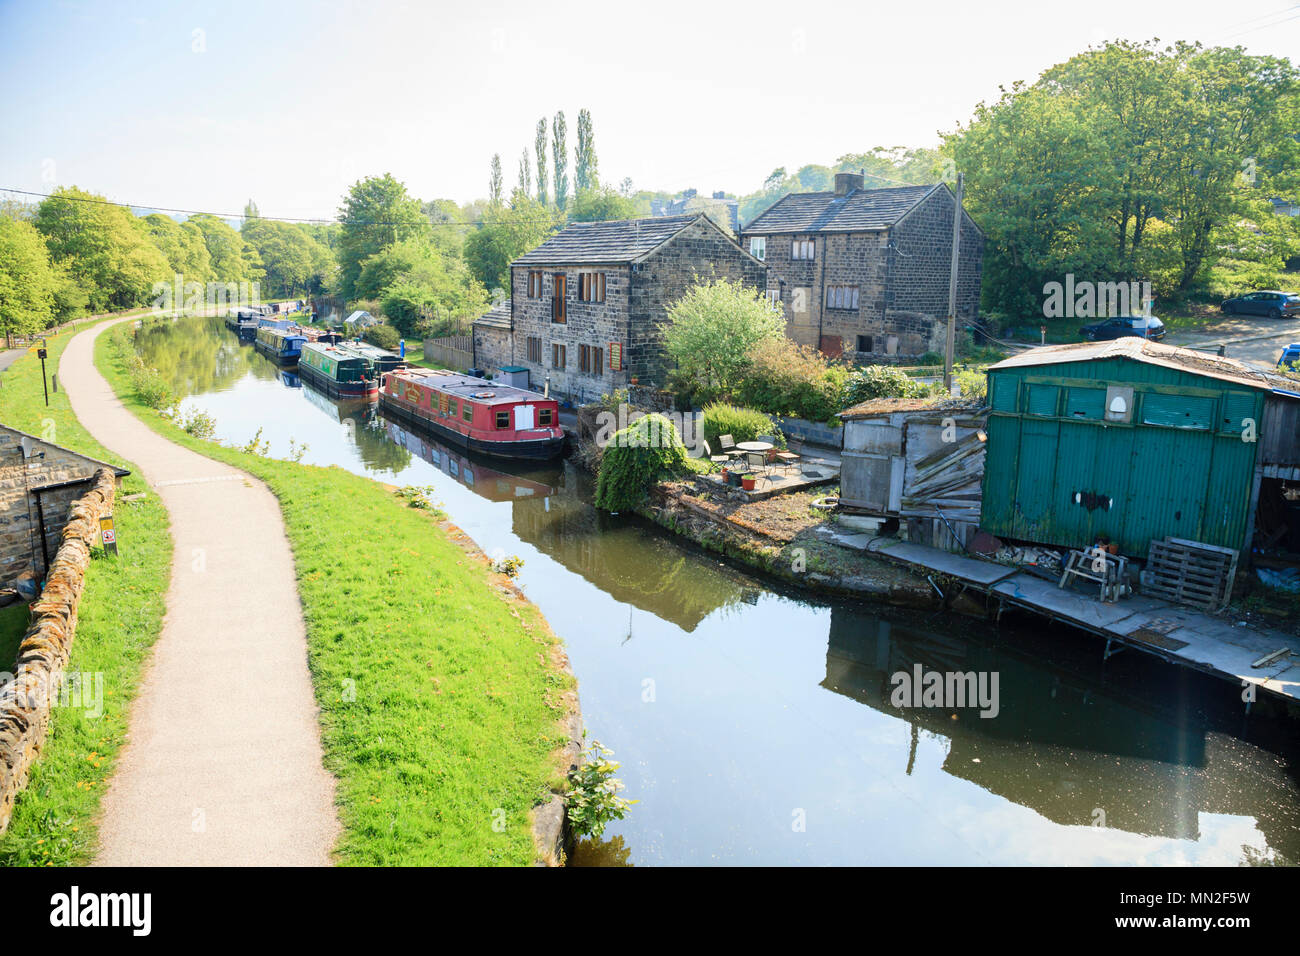 The Leeds/Liverpool canal near Apperley Bridge on the outskirts of Bradford, West Yorkshire, UK Stock Photo